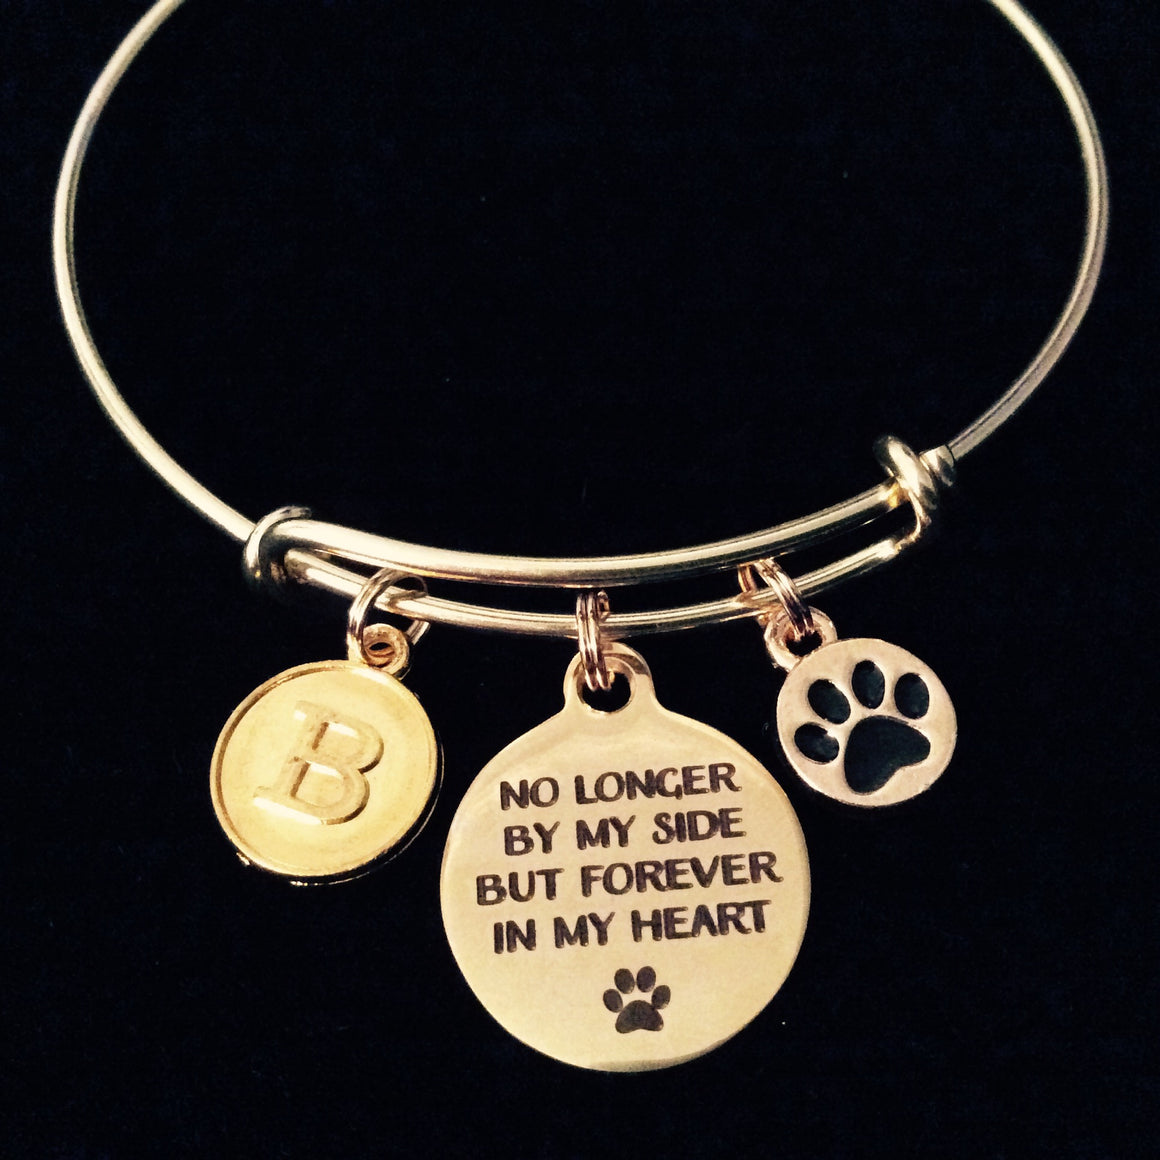 Gold Dog or Cat Memory Bracelet Forever in My Heart Expandable Charm Bangle Adjustable Memorial